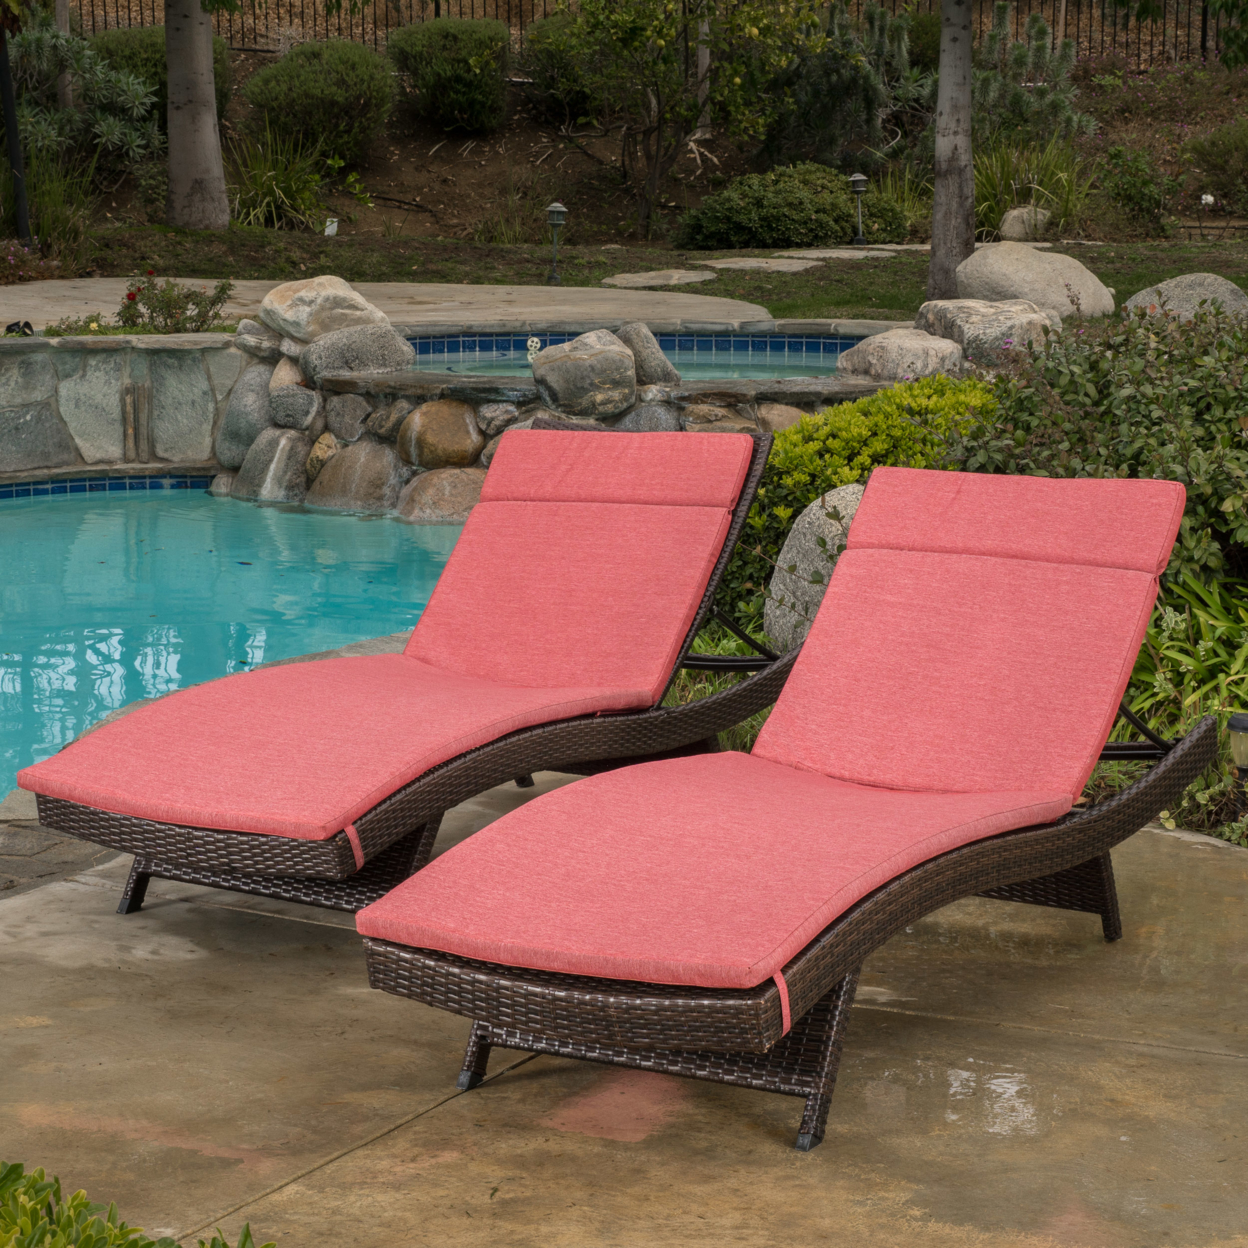 Lakeport Outdoor Adjustable Chaise Lounge Chairs With Cushions (set Of 2) - Navy Blue Cushion